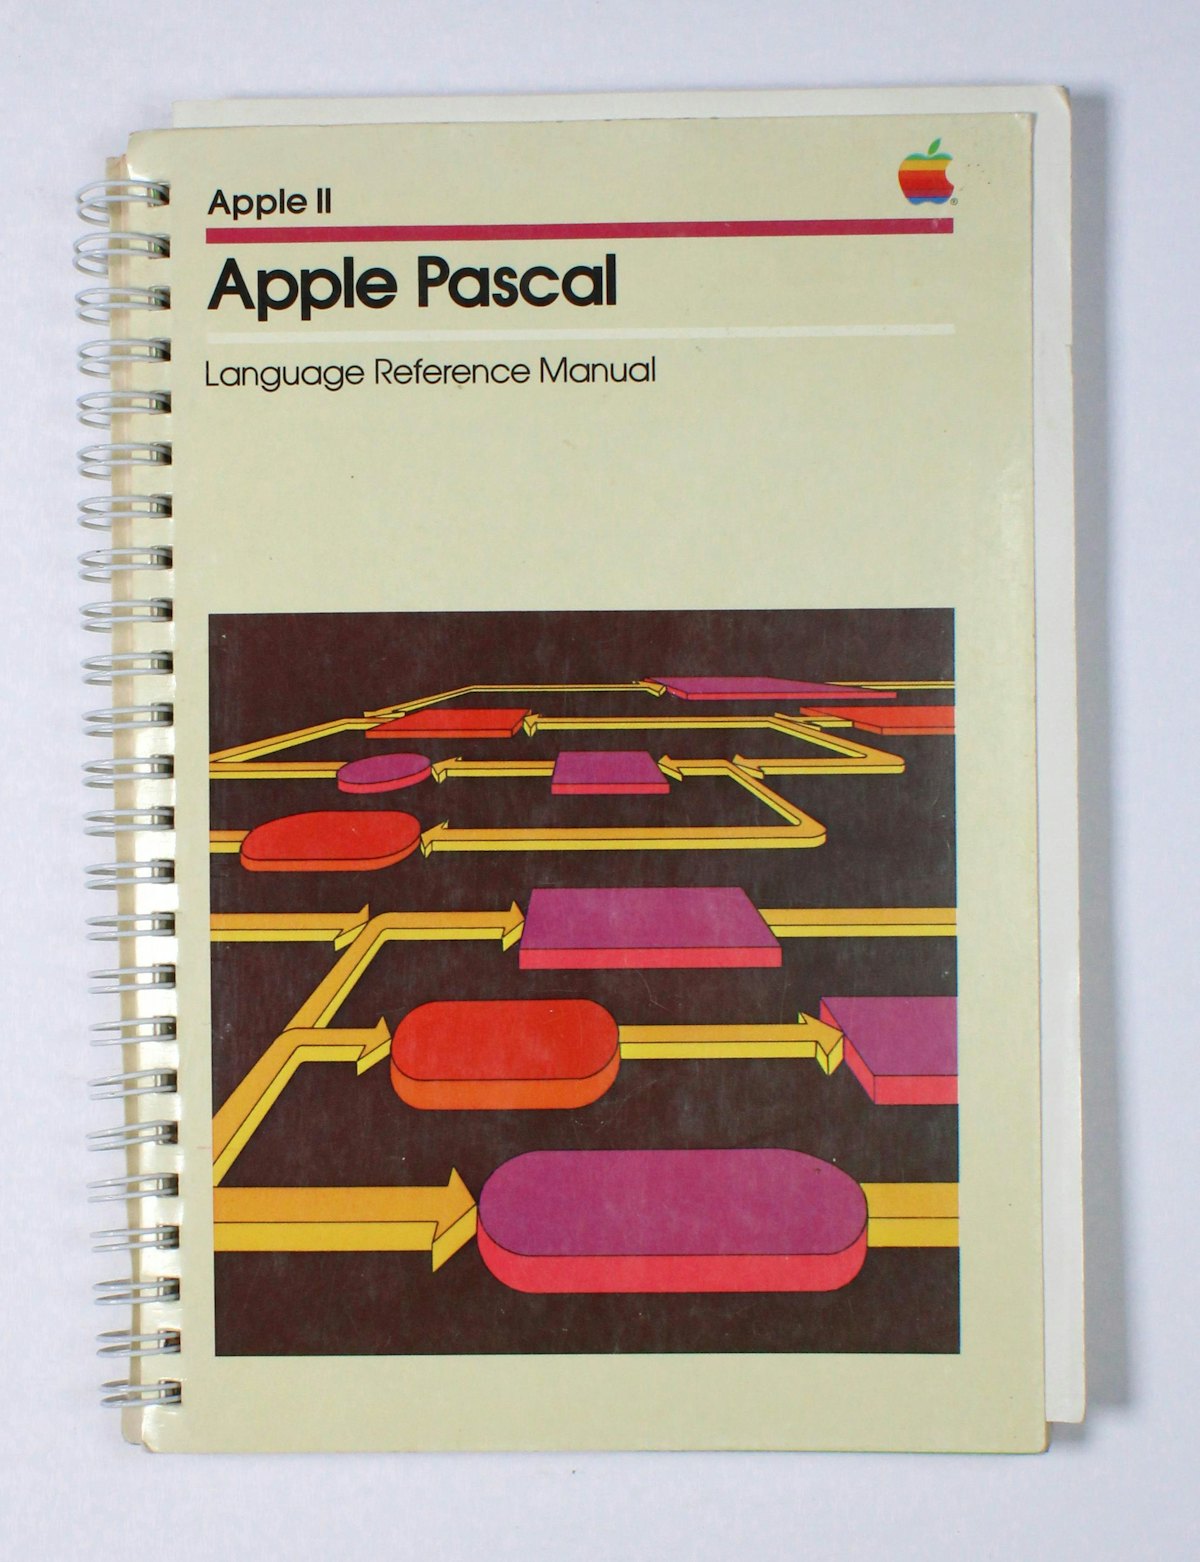 Apple Pascal Language Reference Manual for Apple II